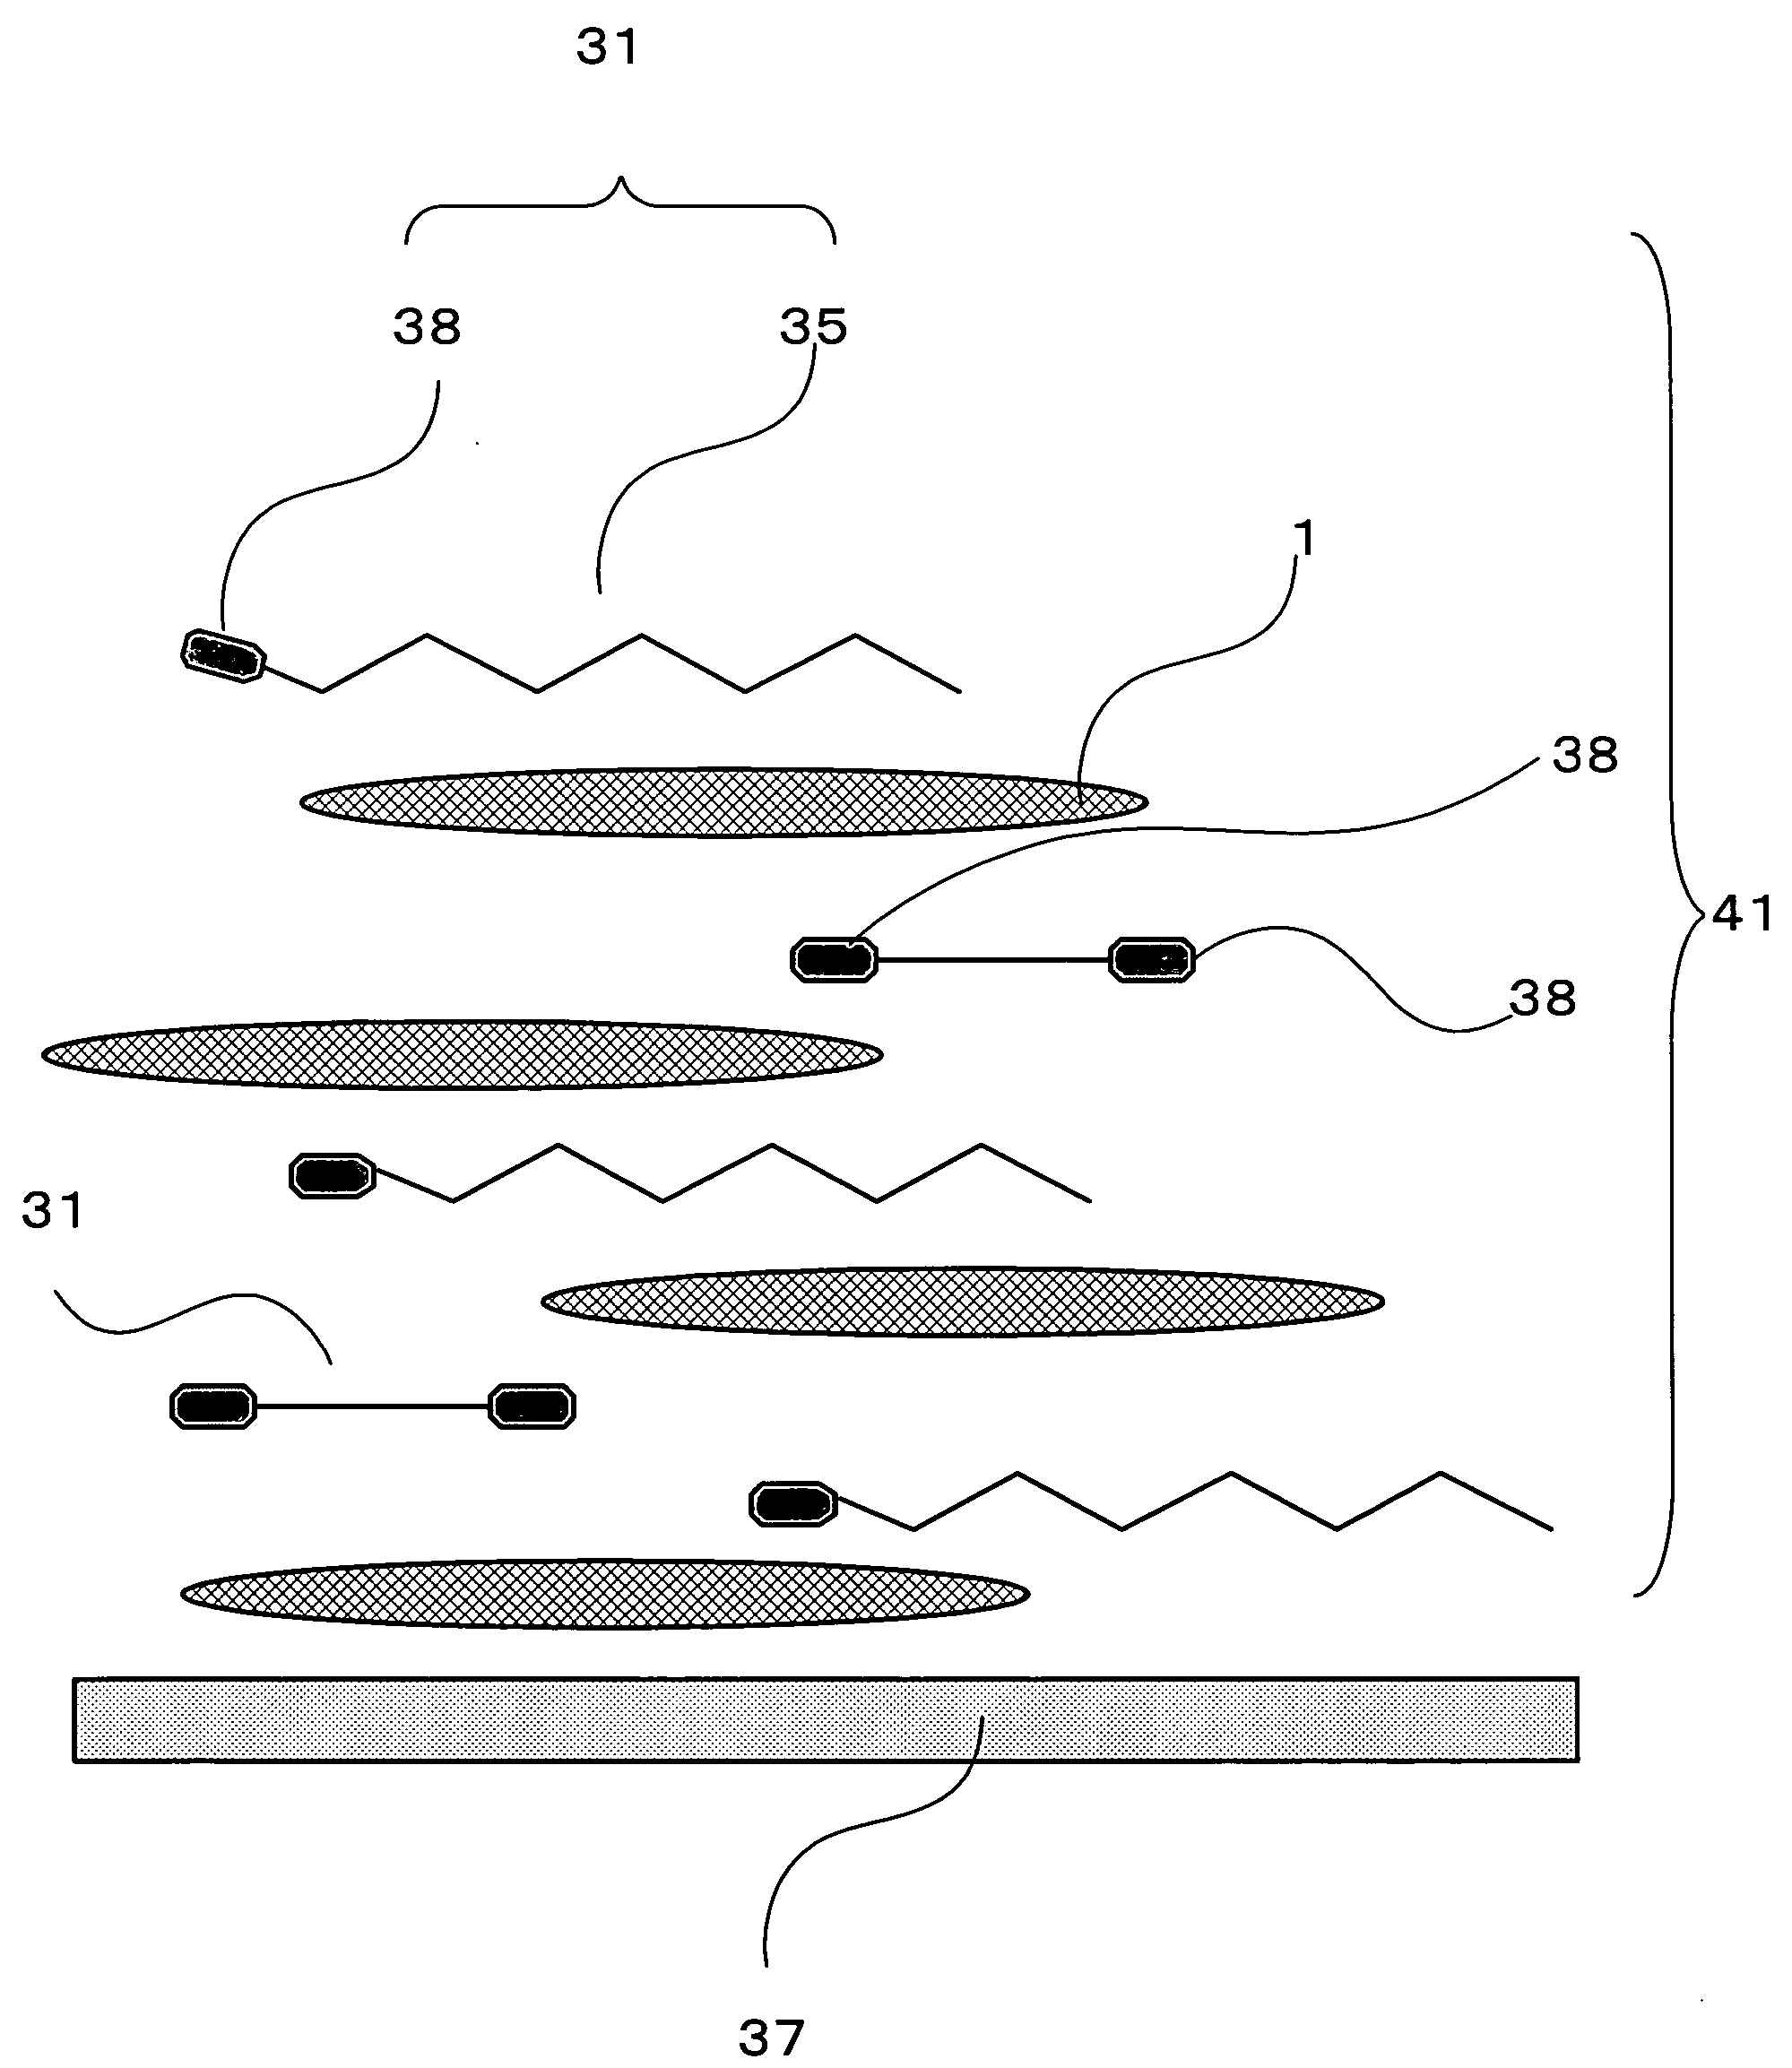 Liquid crystal display device and method of manufacture of the same